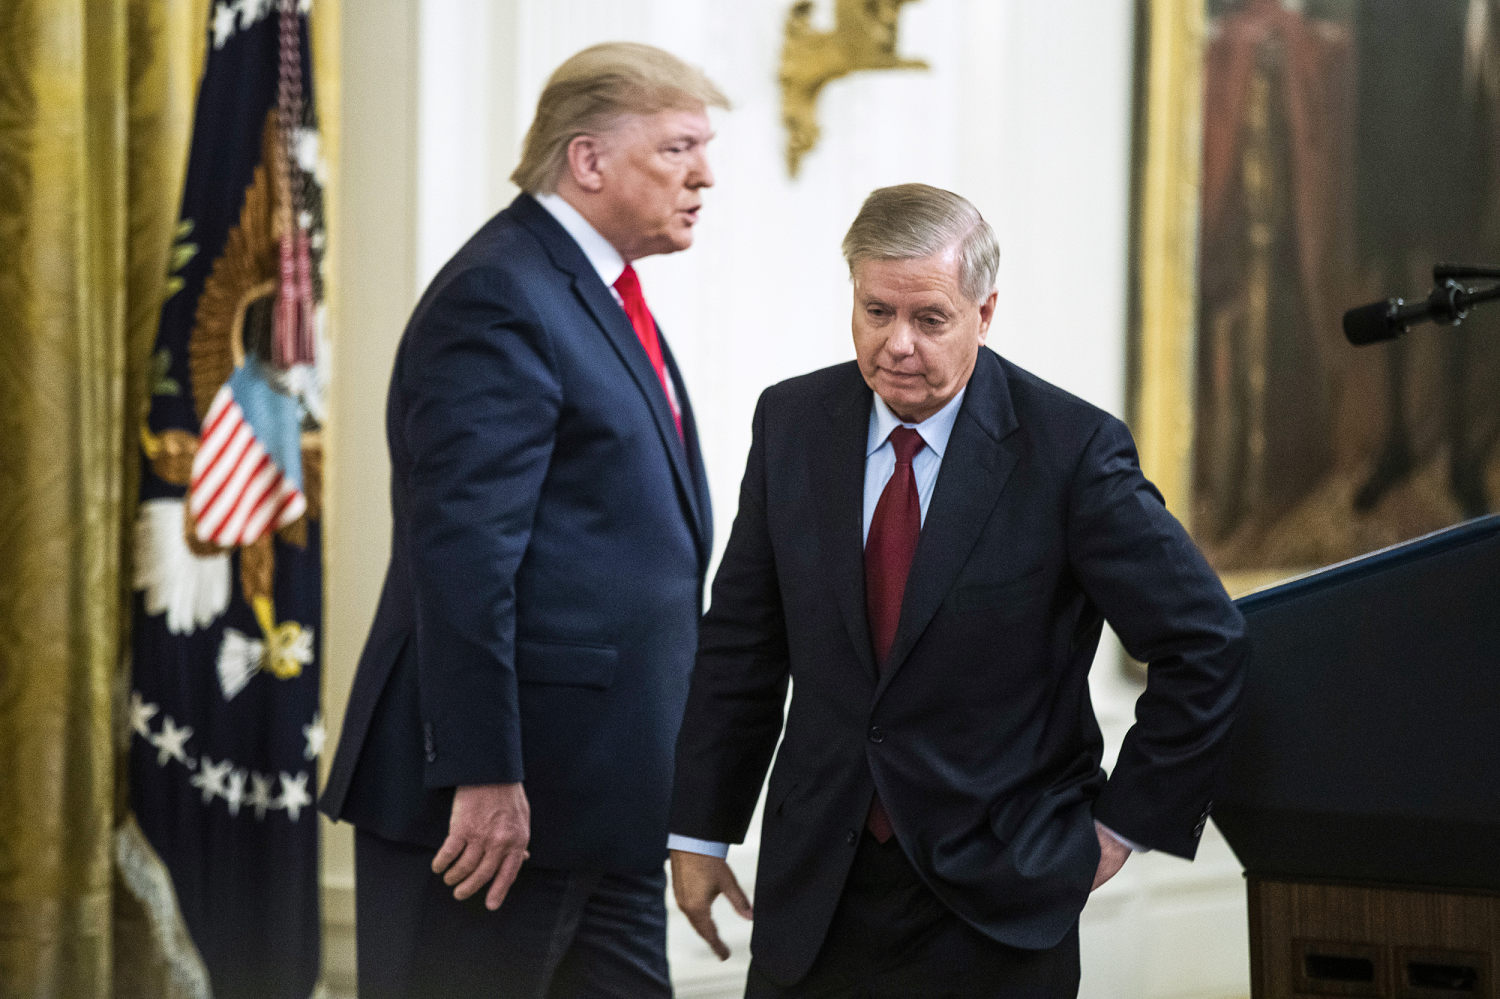 Lindsey Graham says Trump is making 'a mistake' on abortion, vows to push for national limit